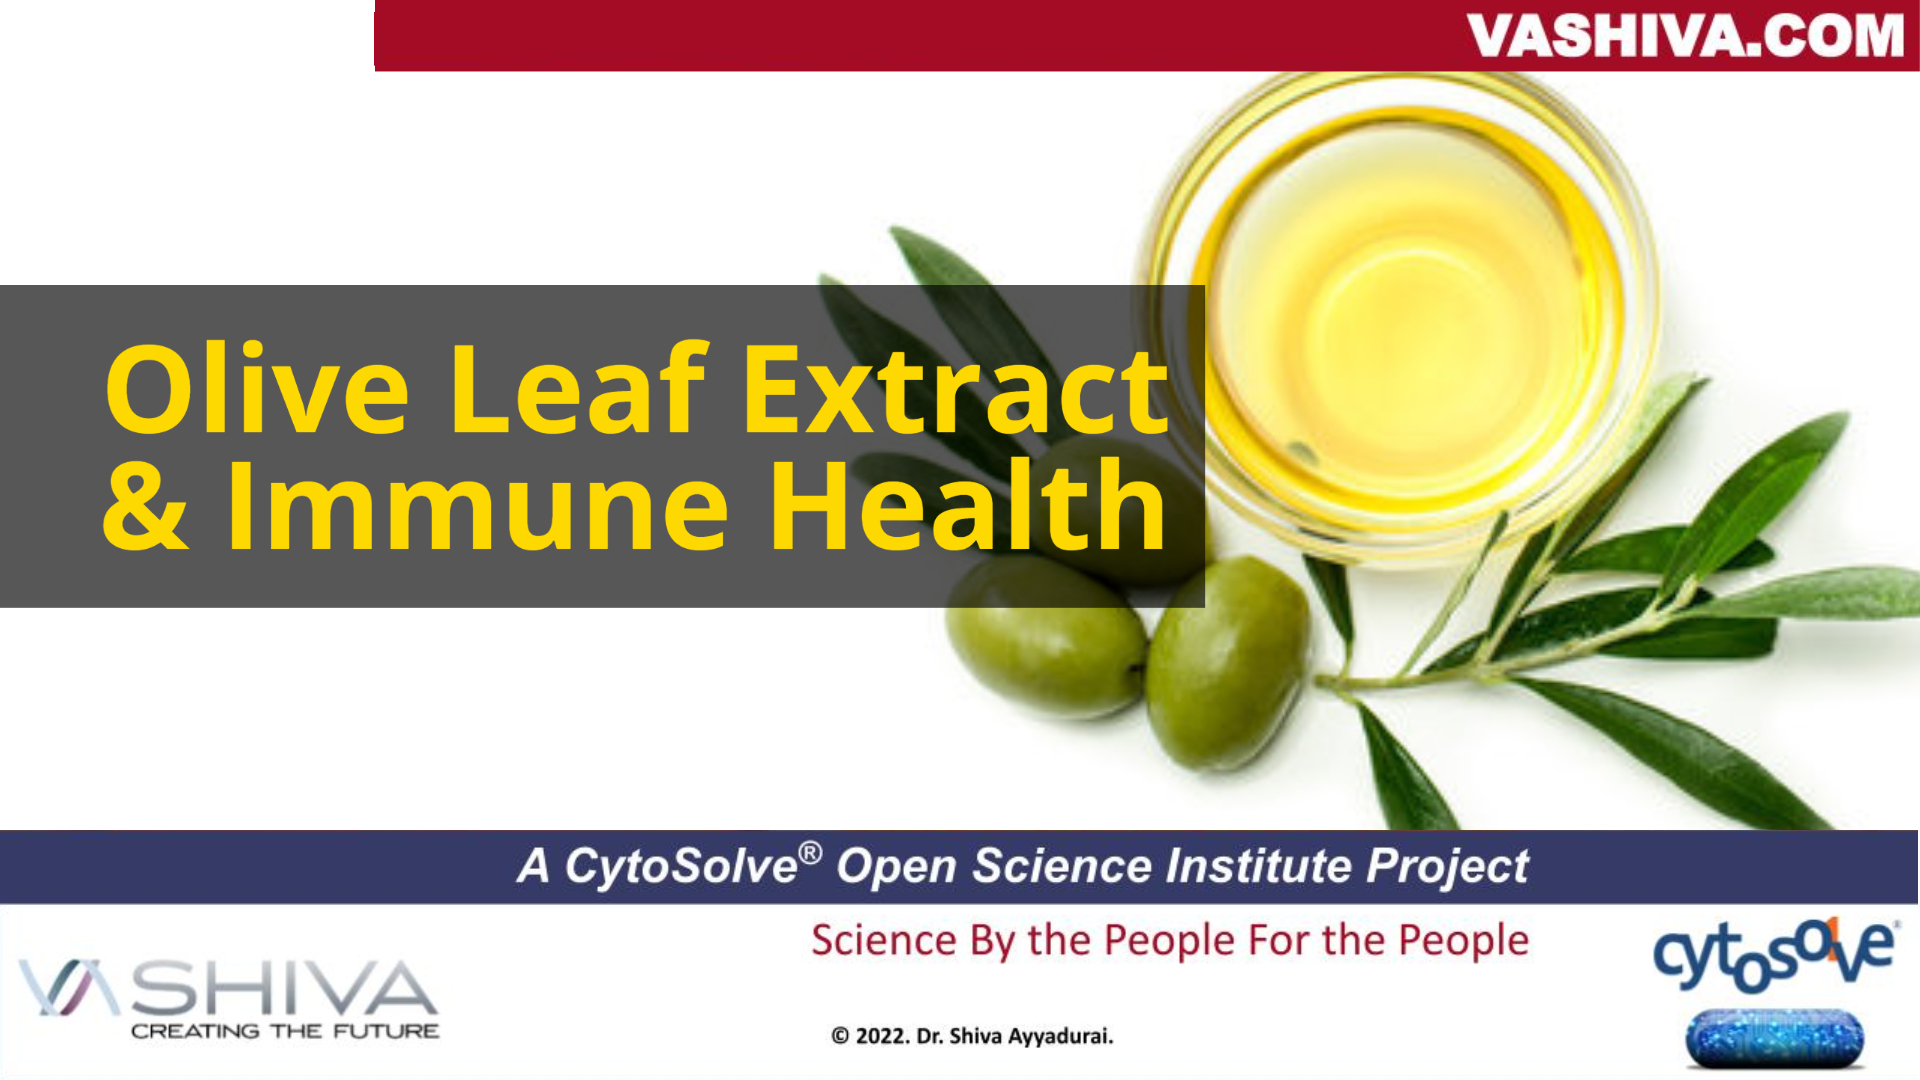 Dr.SHIVA: Olive Leaf Extract & Immune Health - A CytoSolve® Analysis